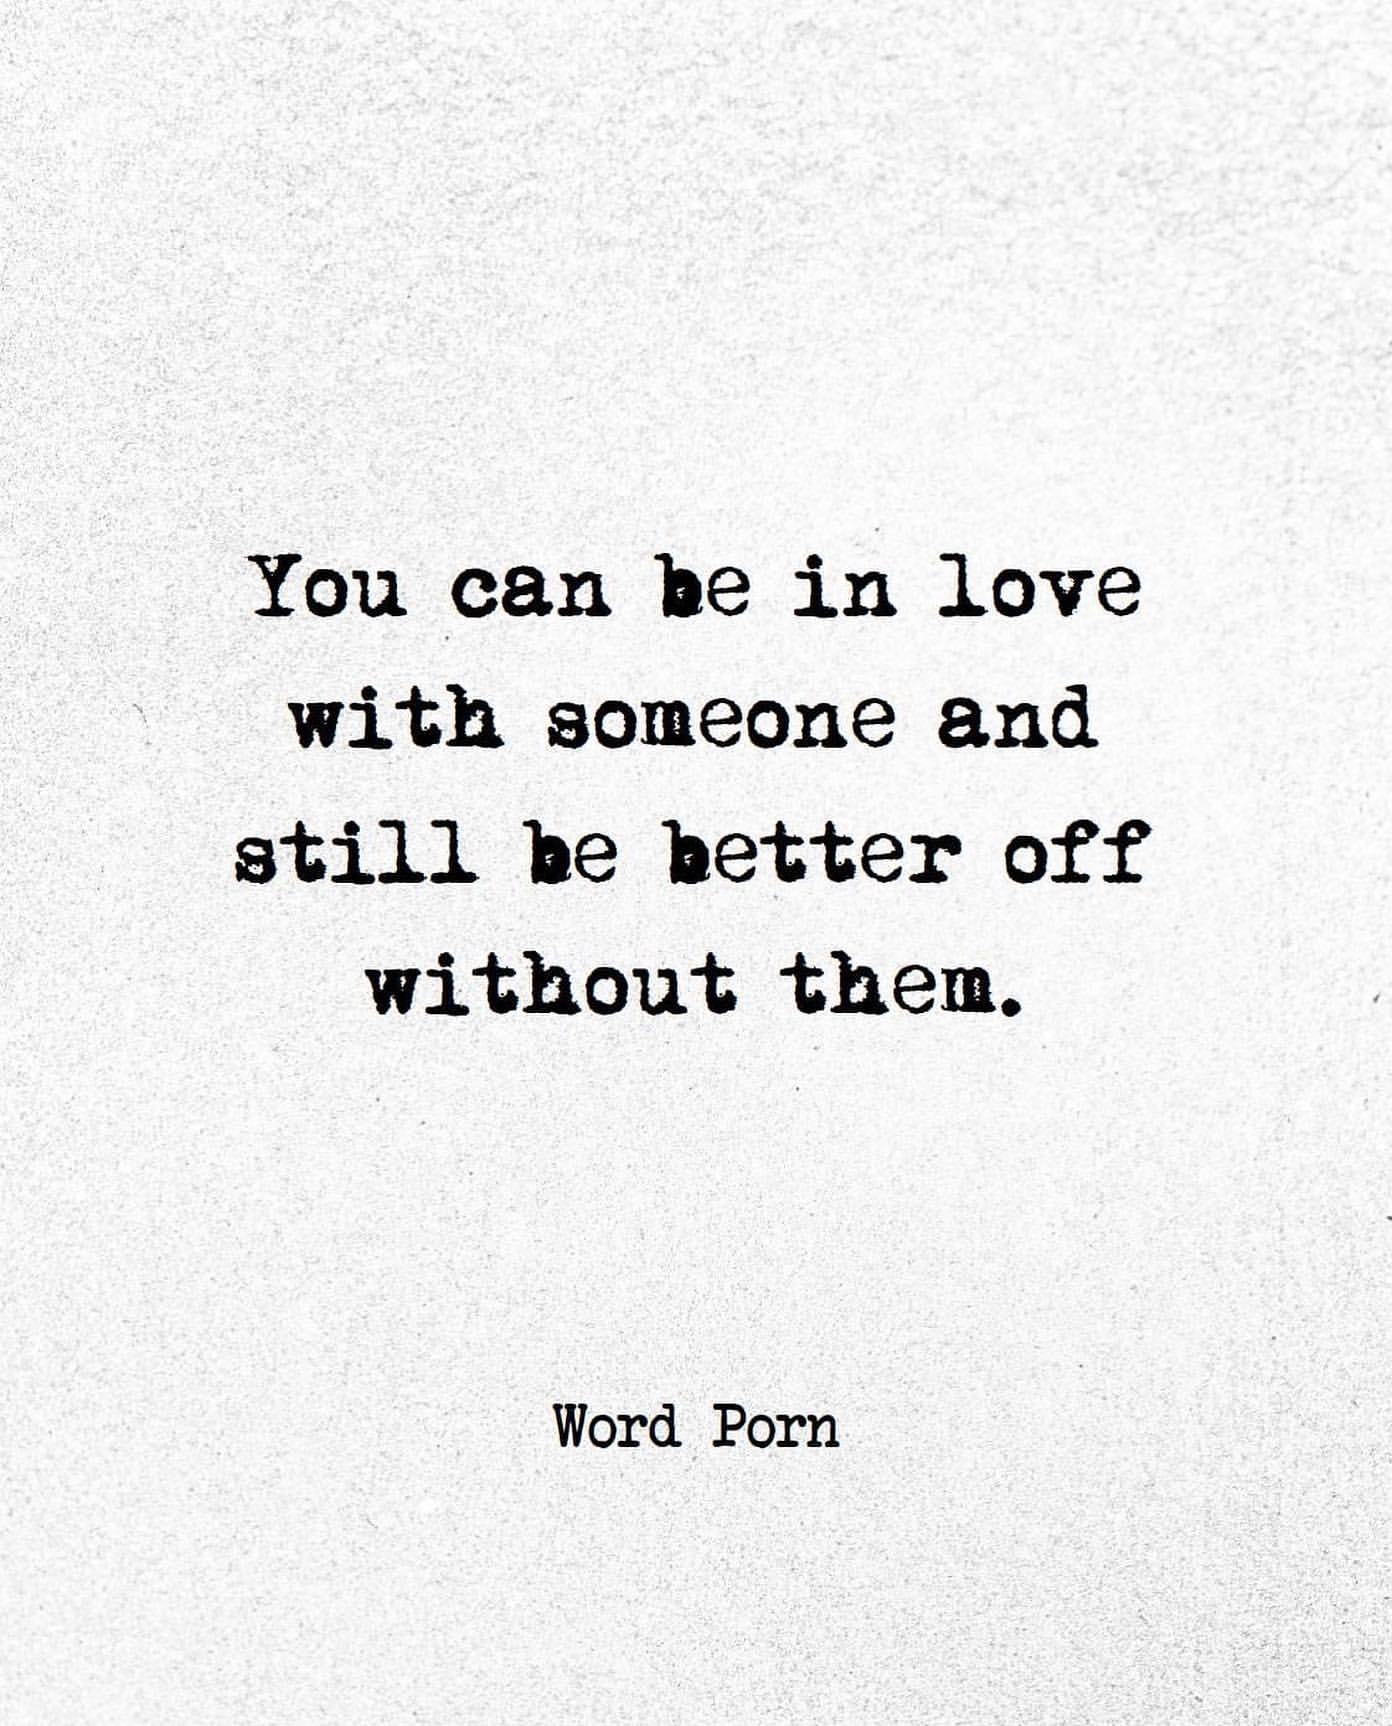 You can be in love with someone and still be better off without them.